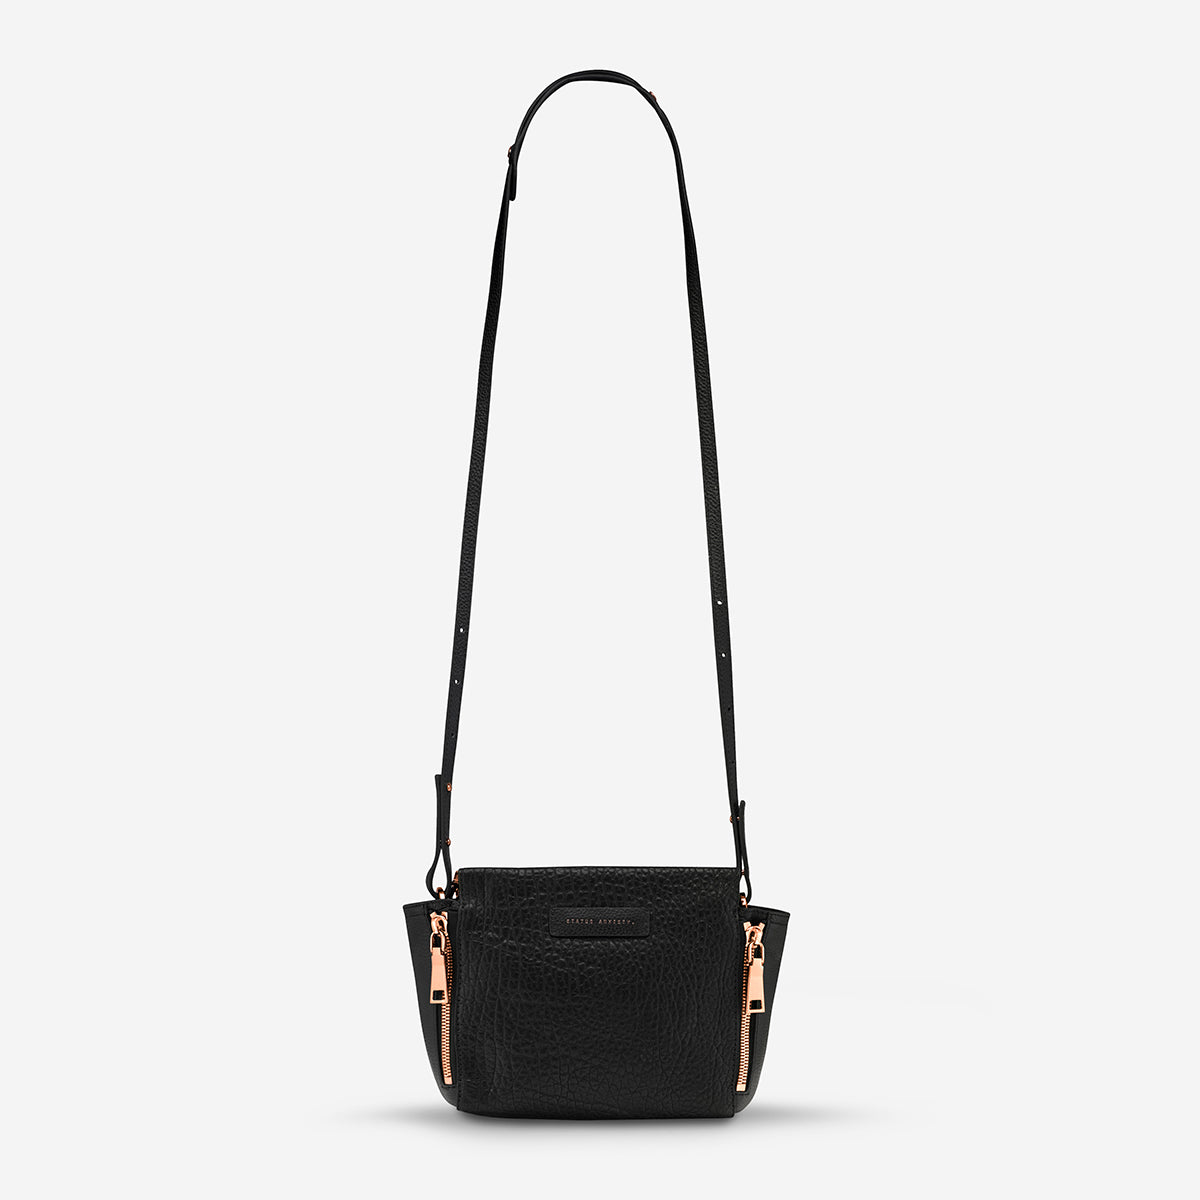 Women's Genuine Leather Goods | Status Anxiety® | Free Shipping